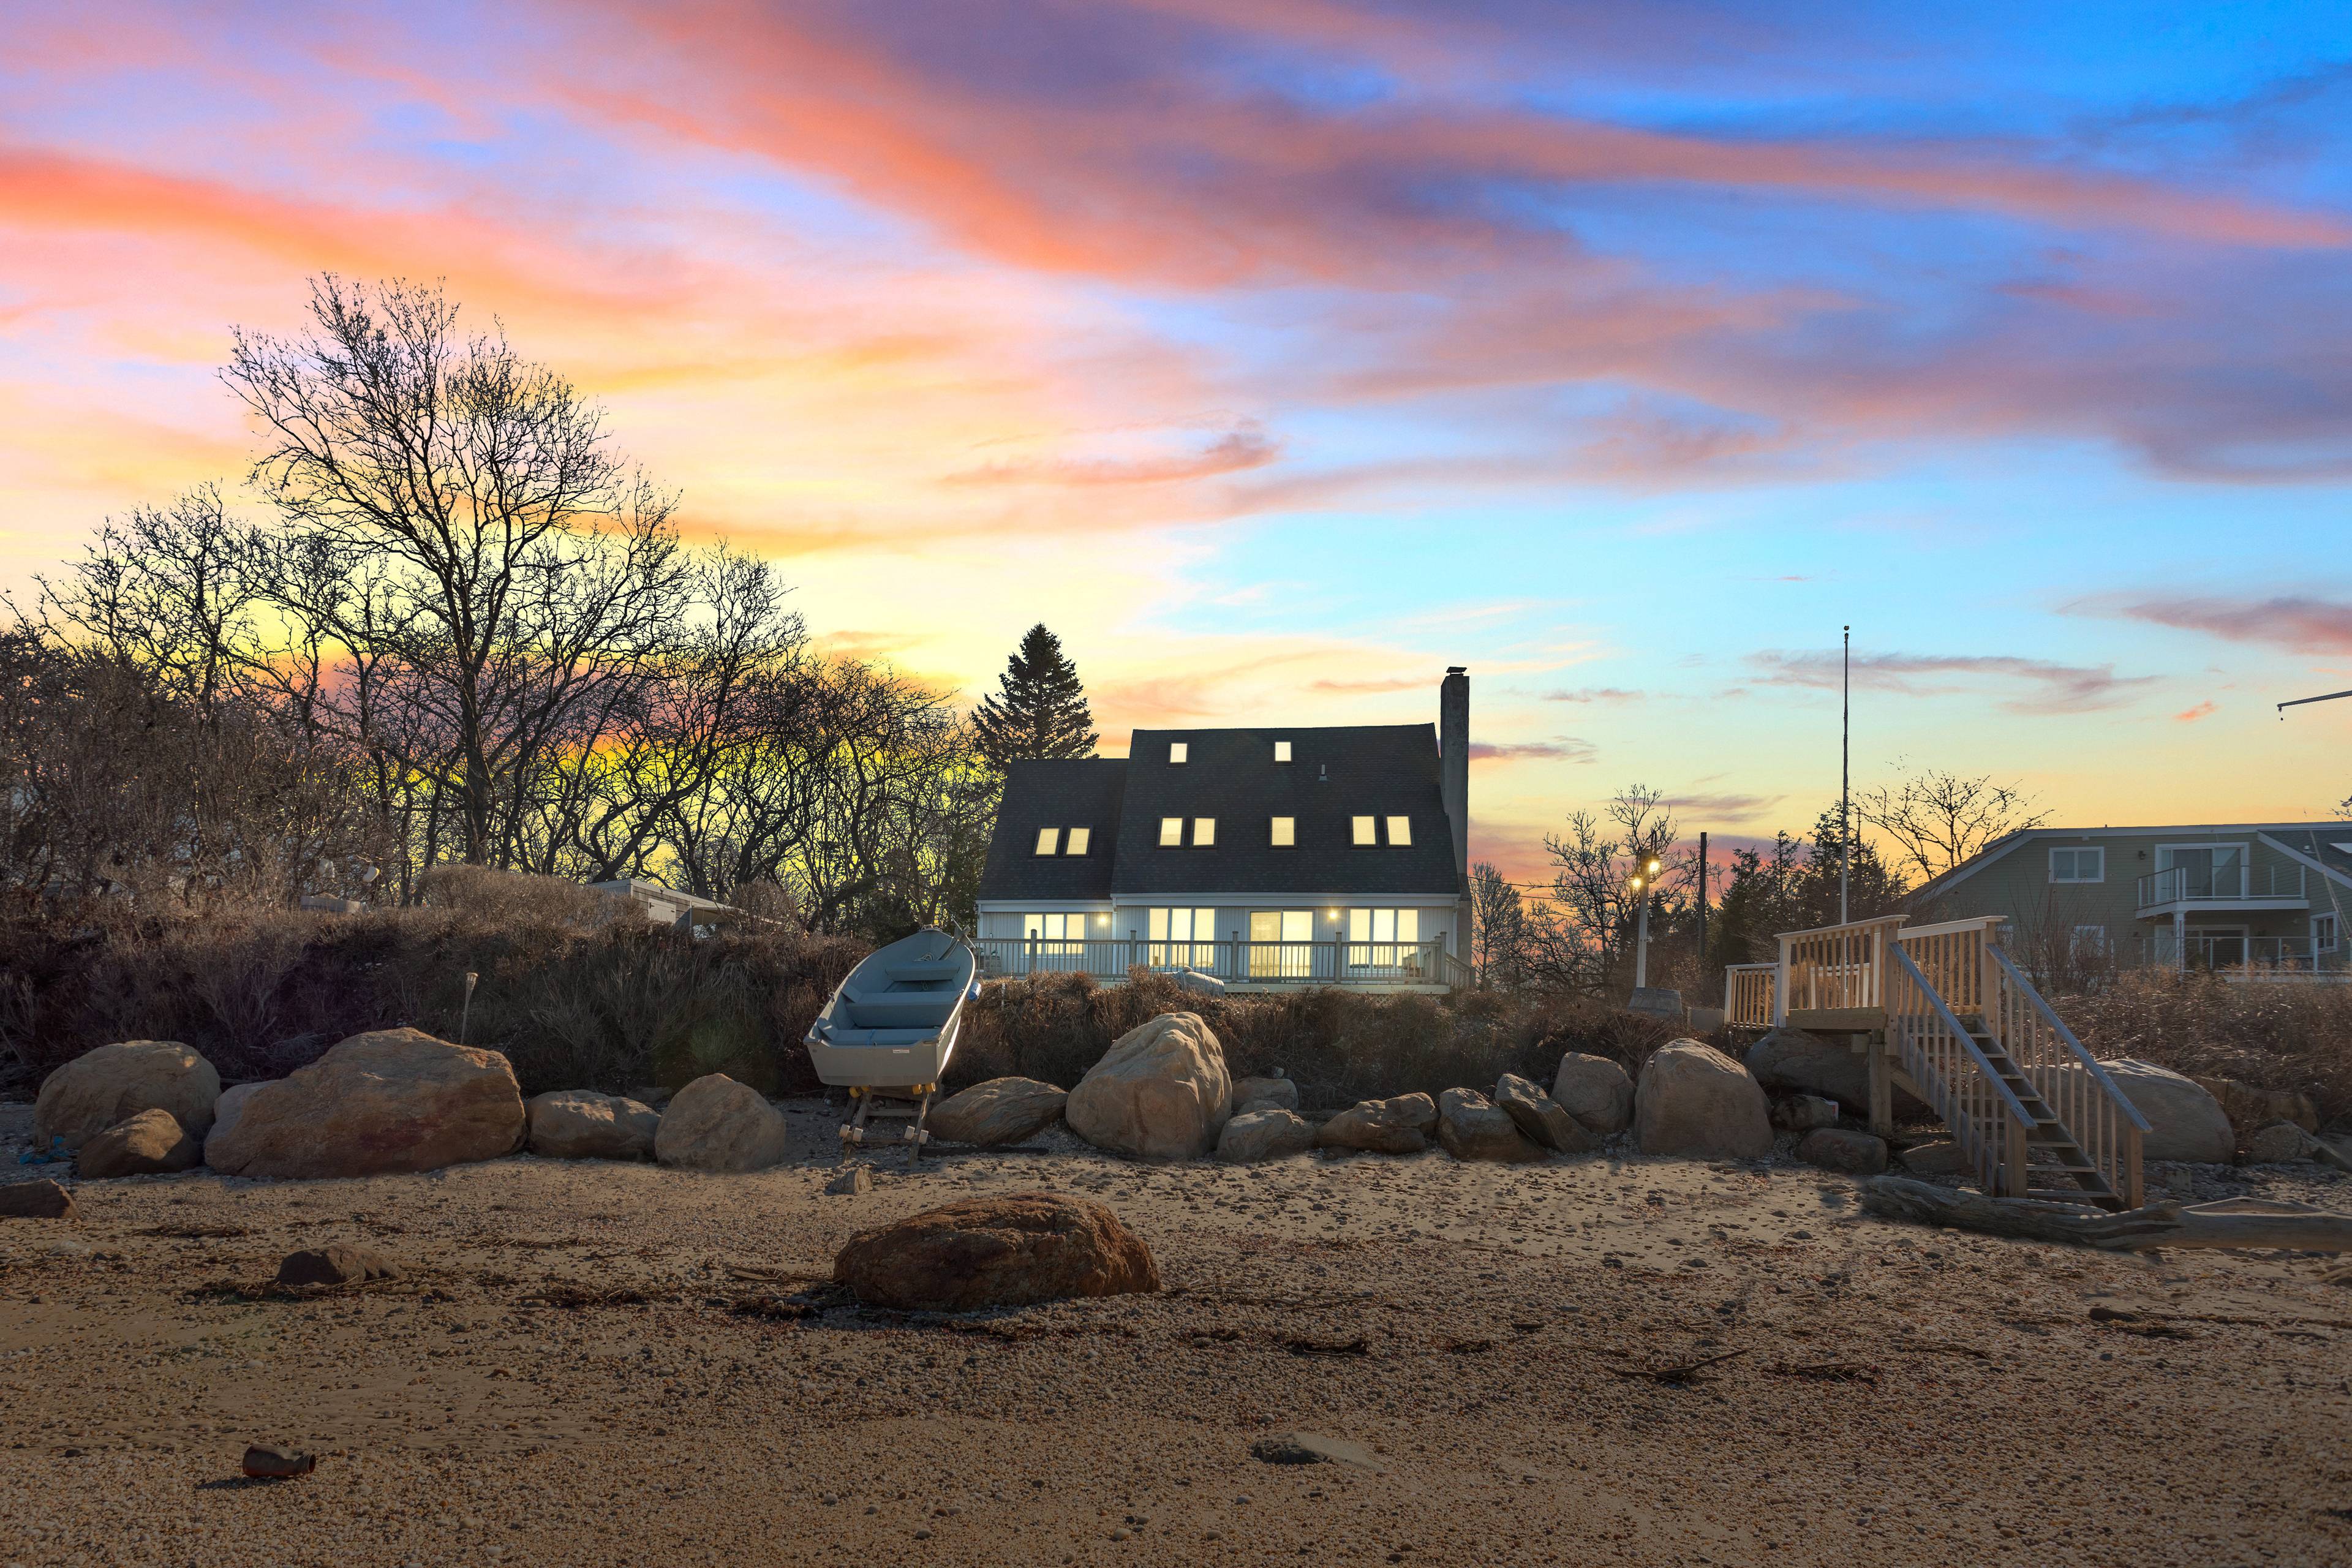 Sound-front Summer Rental in Greenport with over 100 Feet of Private Beach